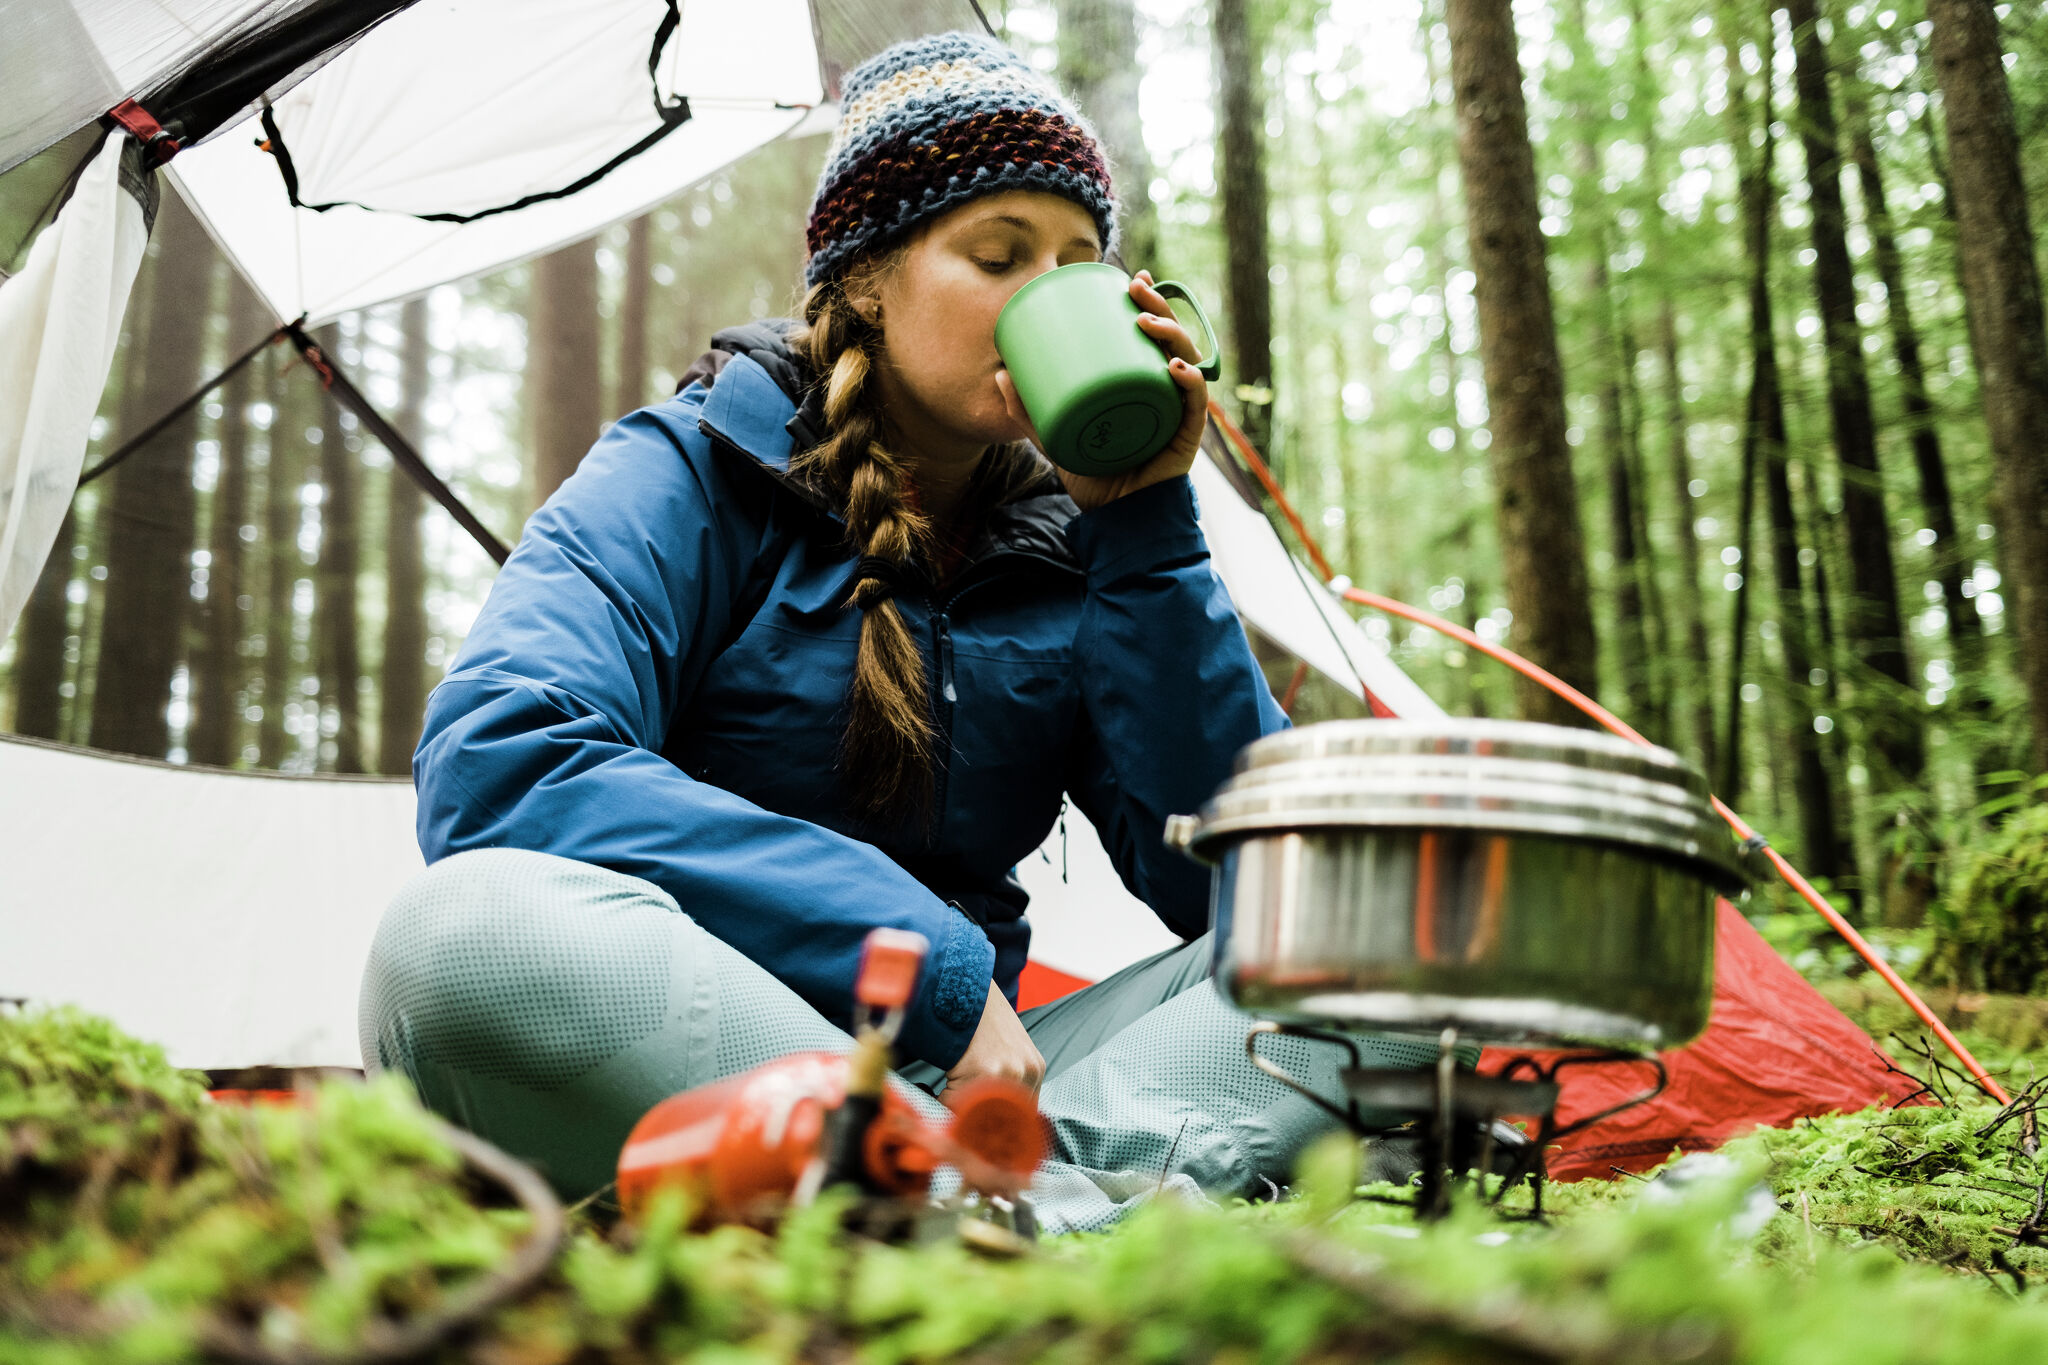 The Best Camping Cookware for Making Delicious Meals in the